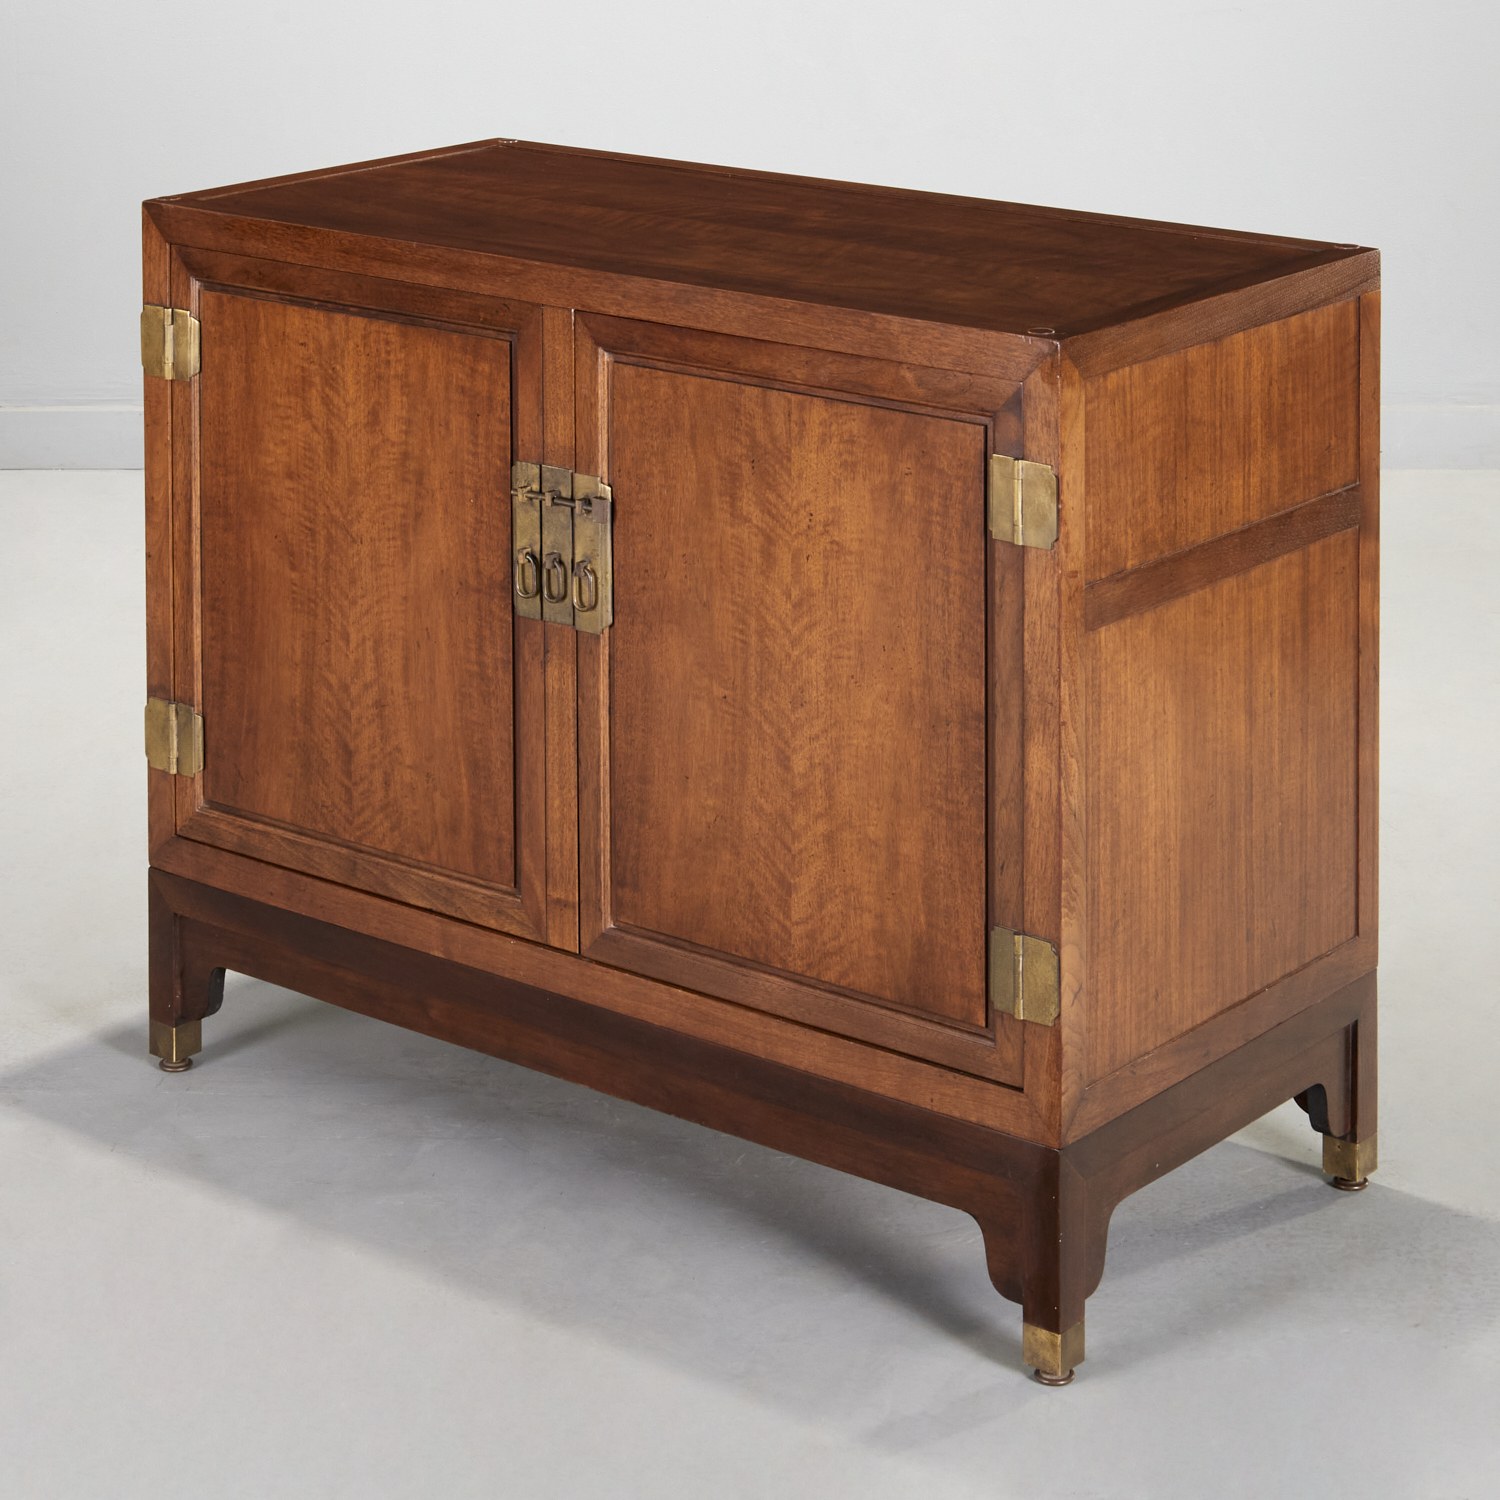 BAKER CHINESE STYLE CABINET ON 30bd8d